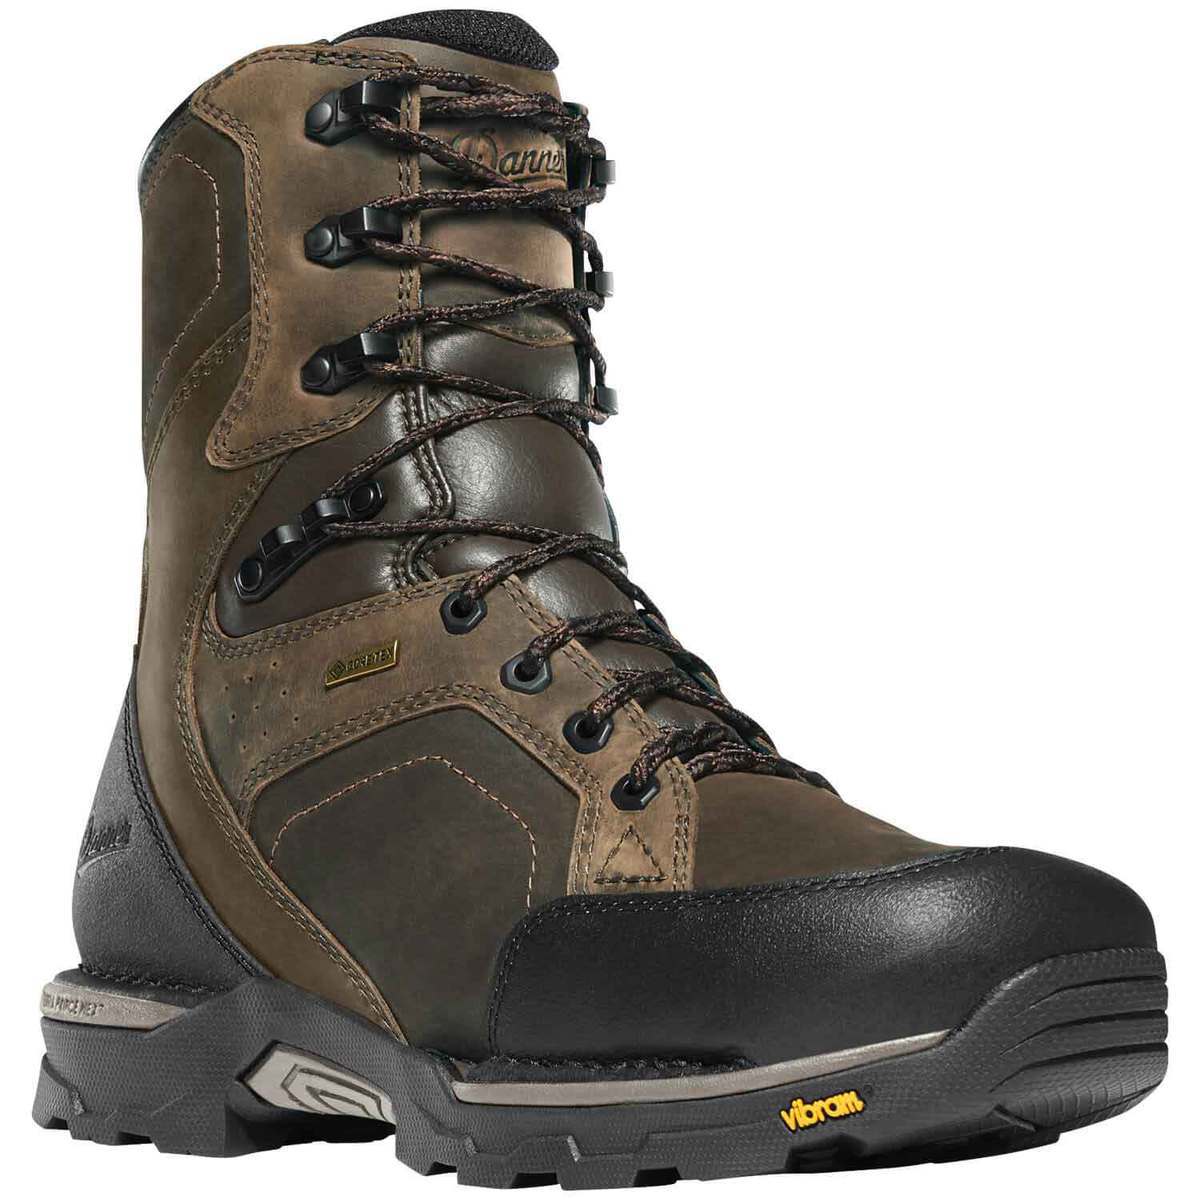 Danner Men's Crucial Soft Toe Work Boots - Brown - Size 12 EE - Brown ...